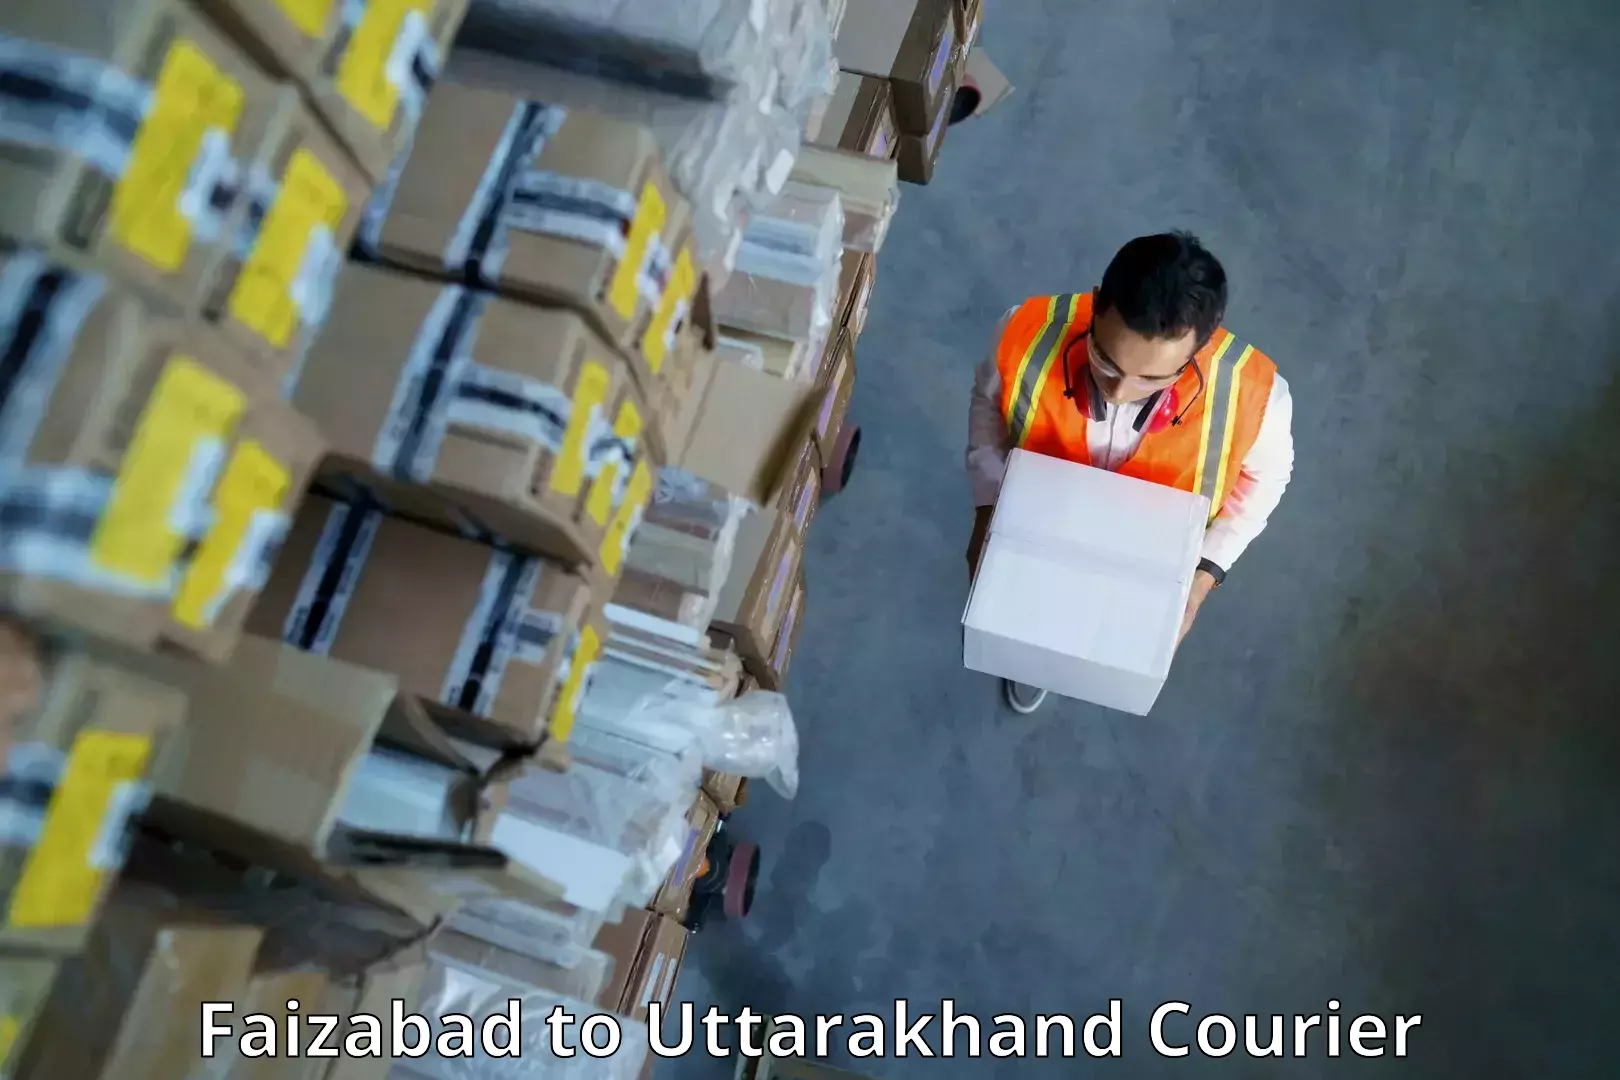 Expedited shipping methods Faizabad to Roorkee